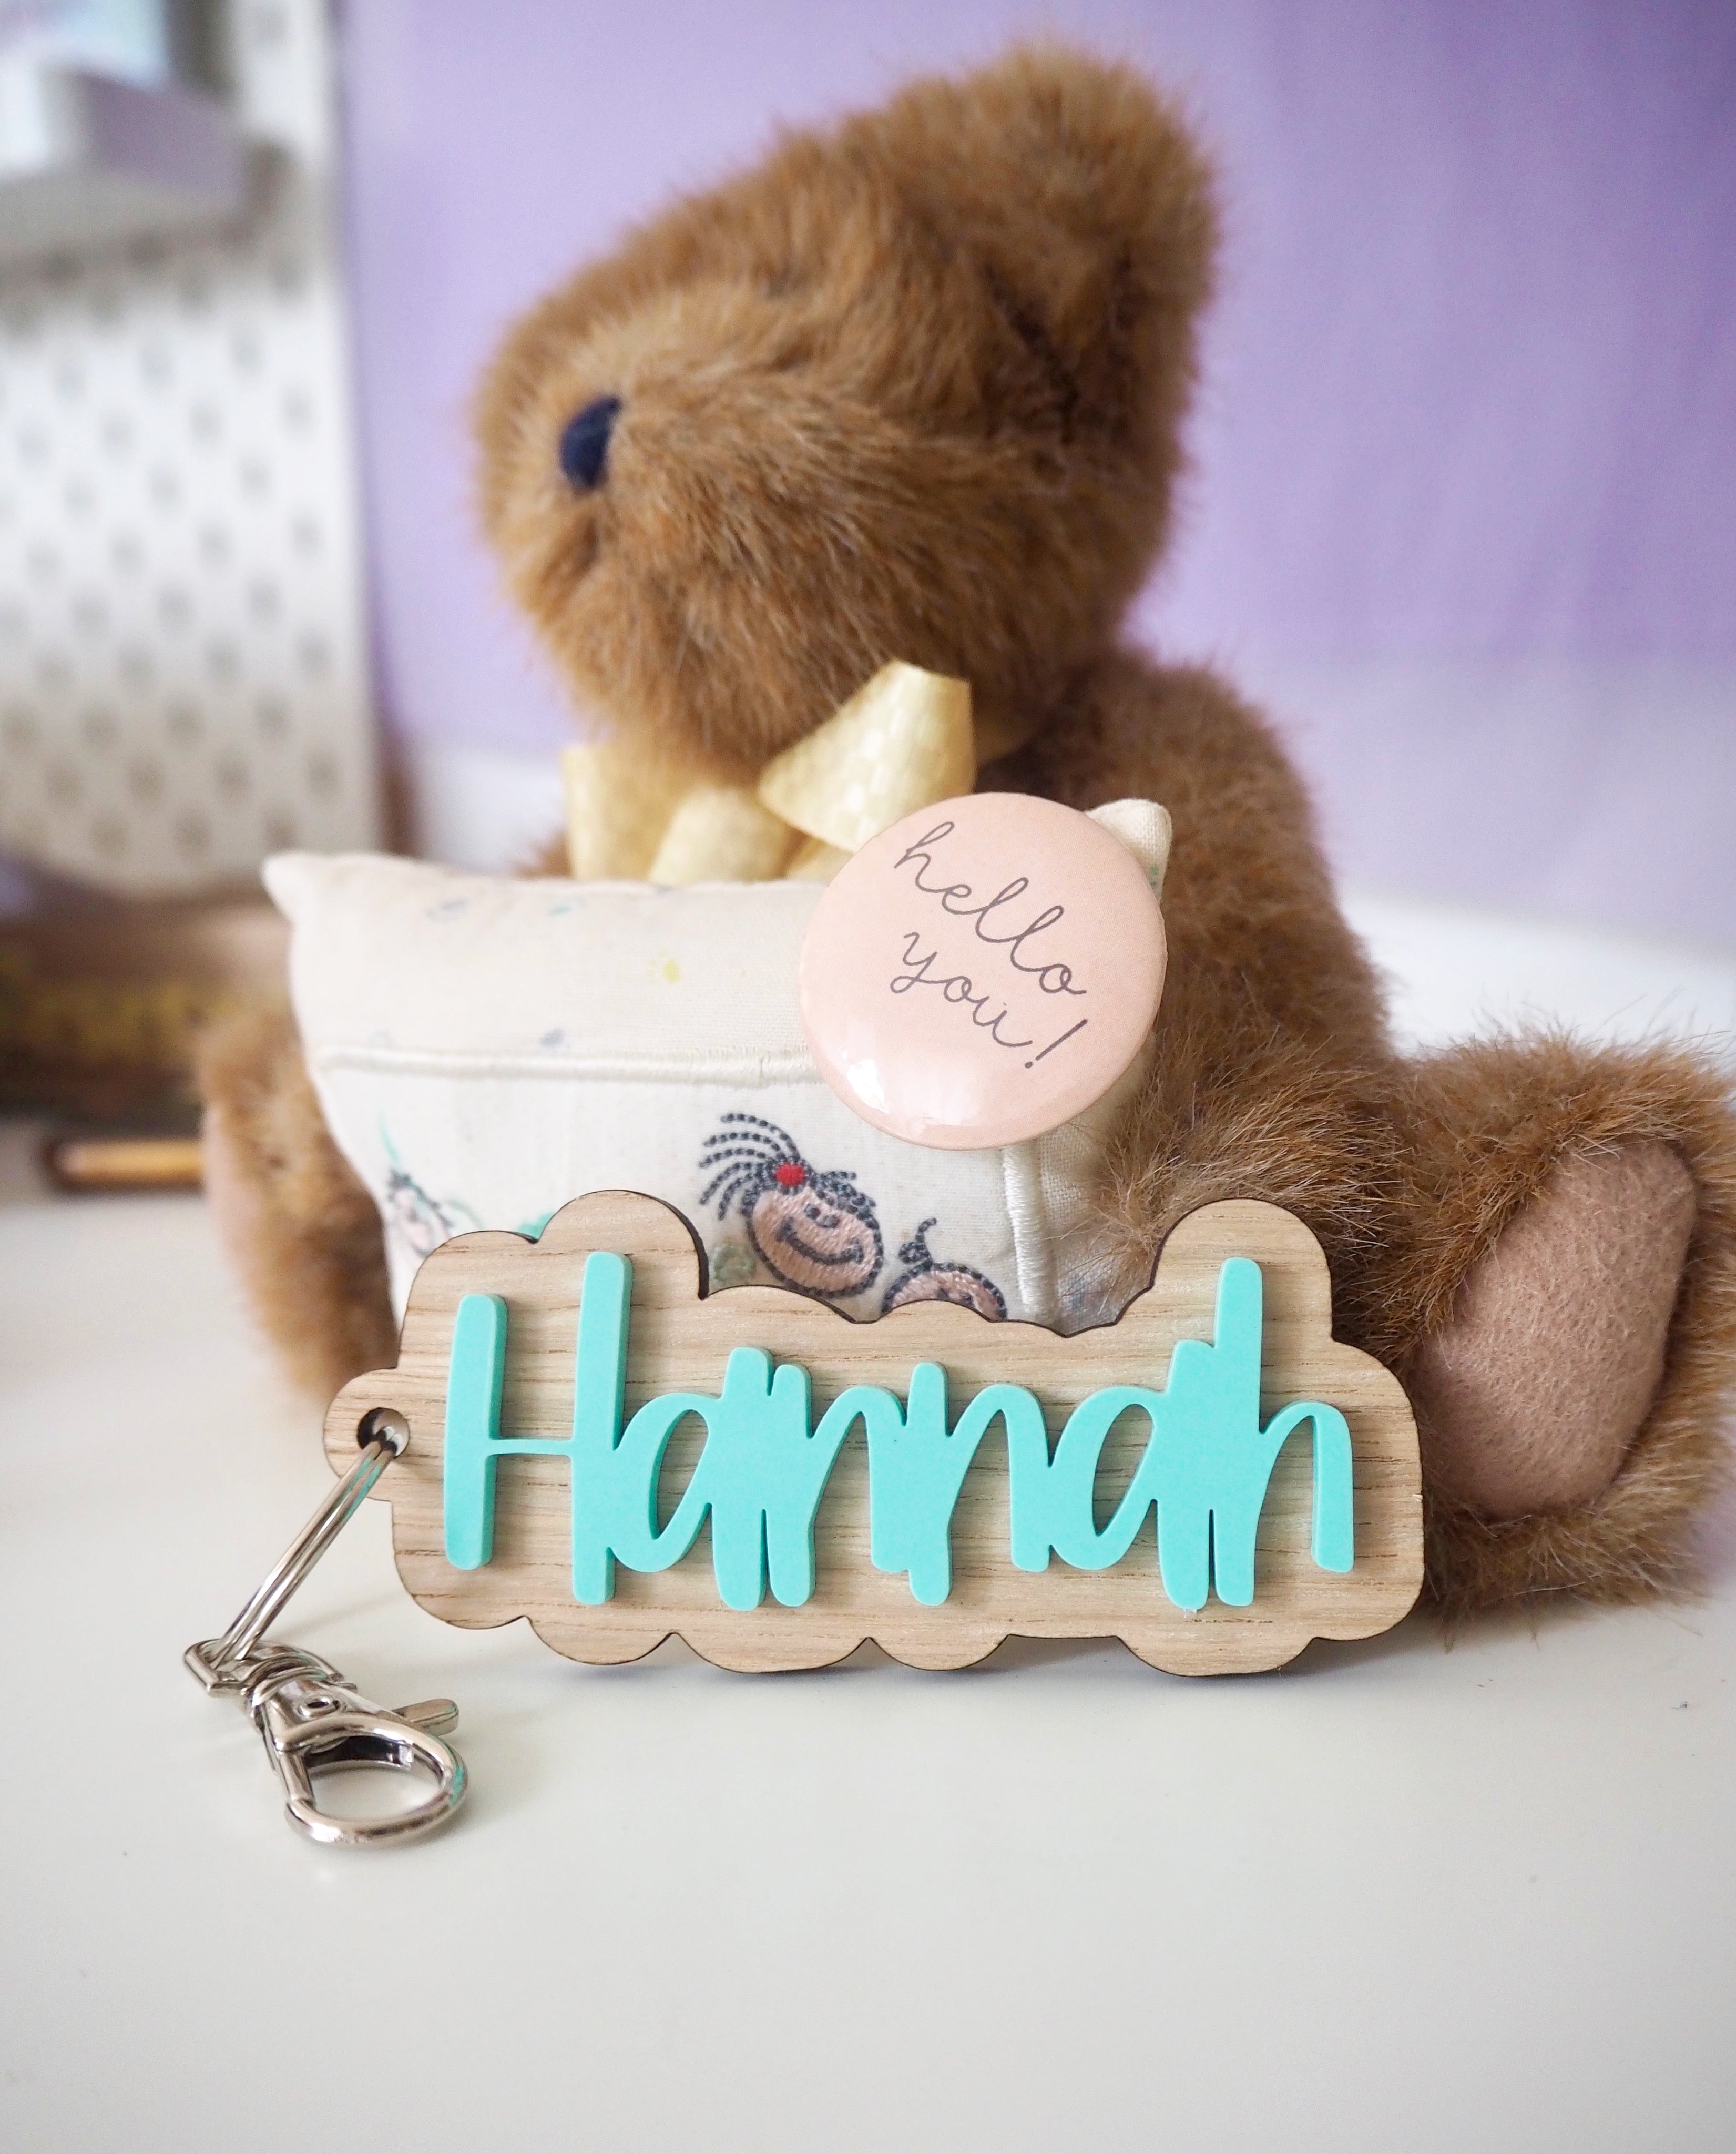 Jessica - I Love Name Metal Heart Keychain Key Chain Ring, Multiple Colors  Available - Walmart.com